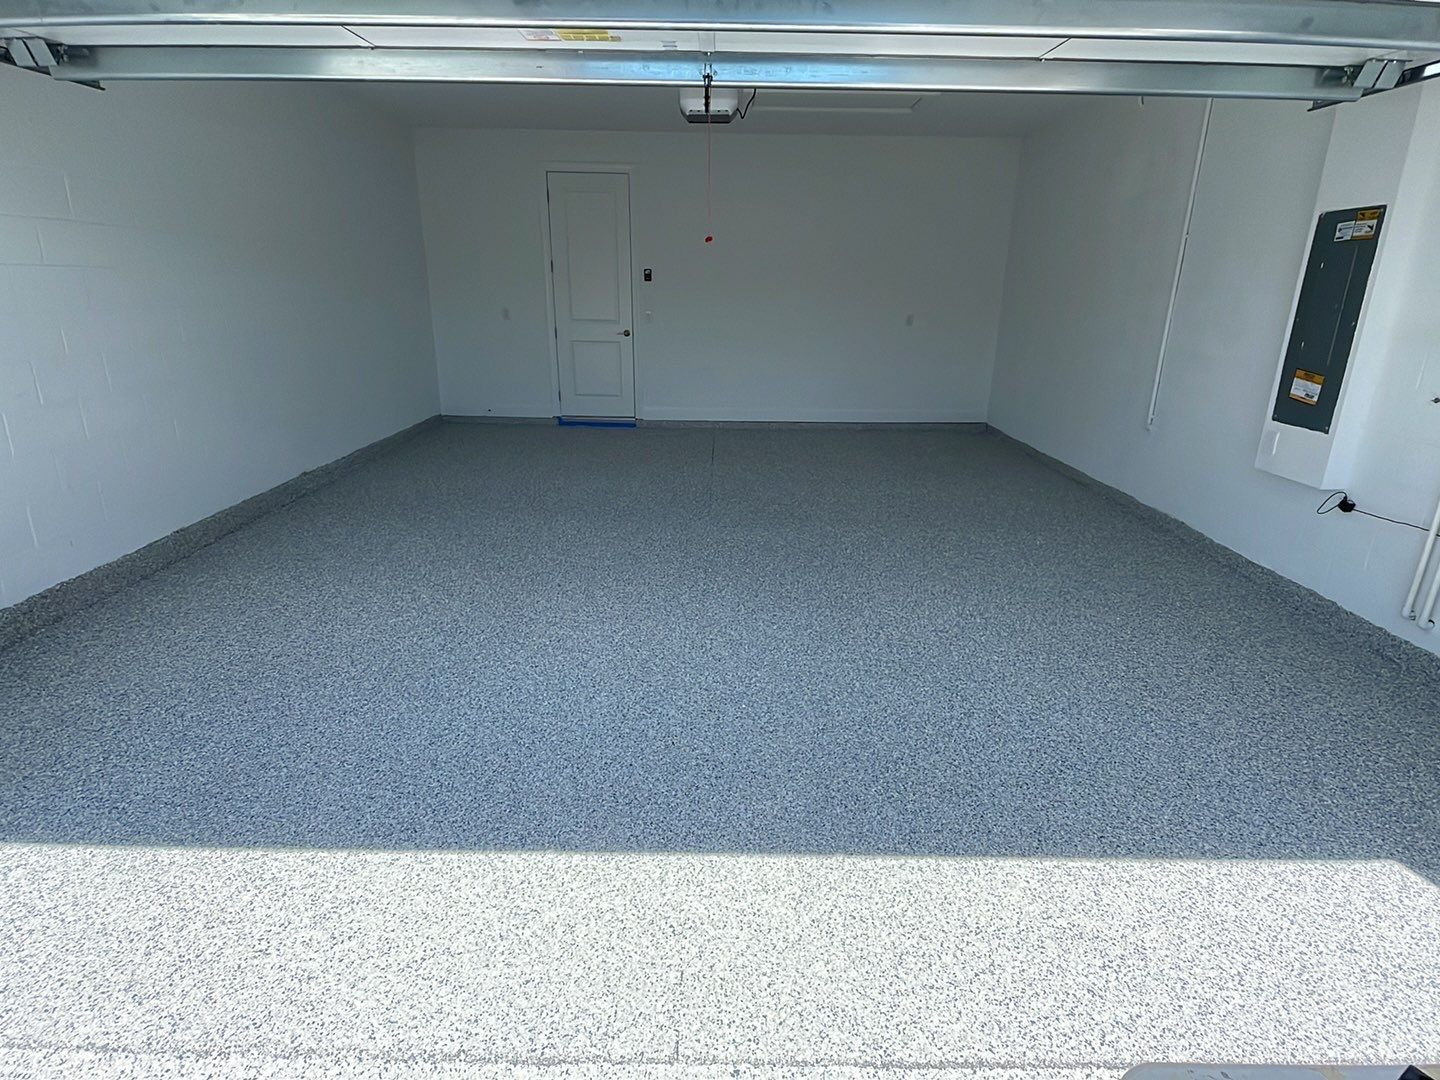 Interior of garage with concrete coating on floor and baseboard 